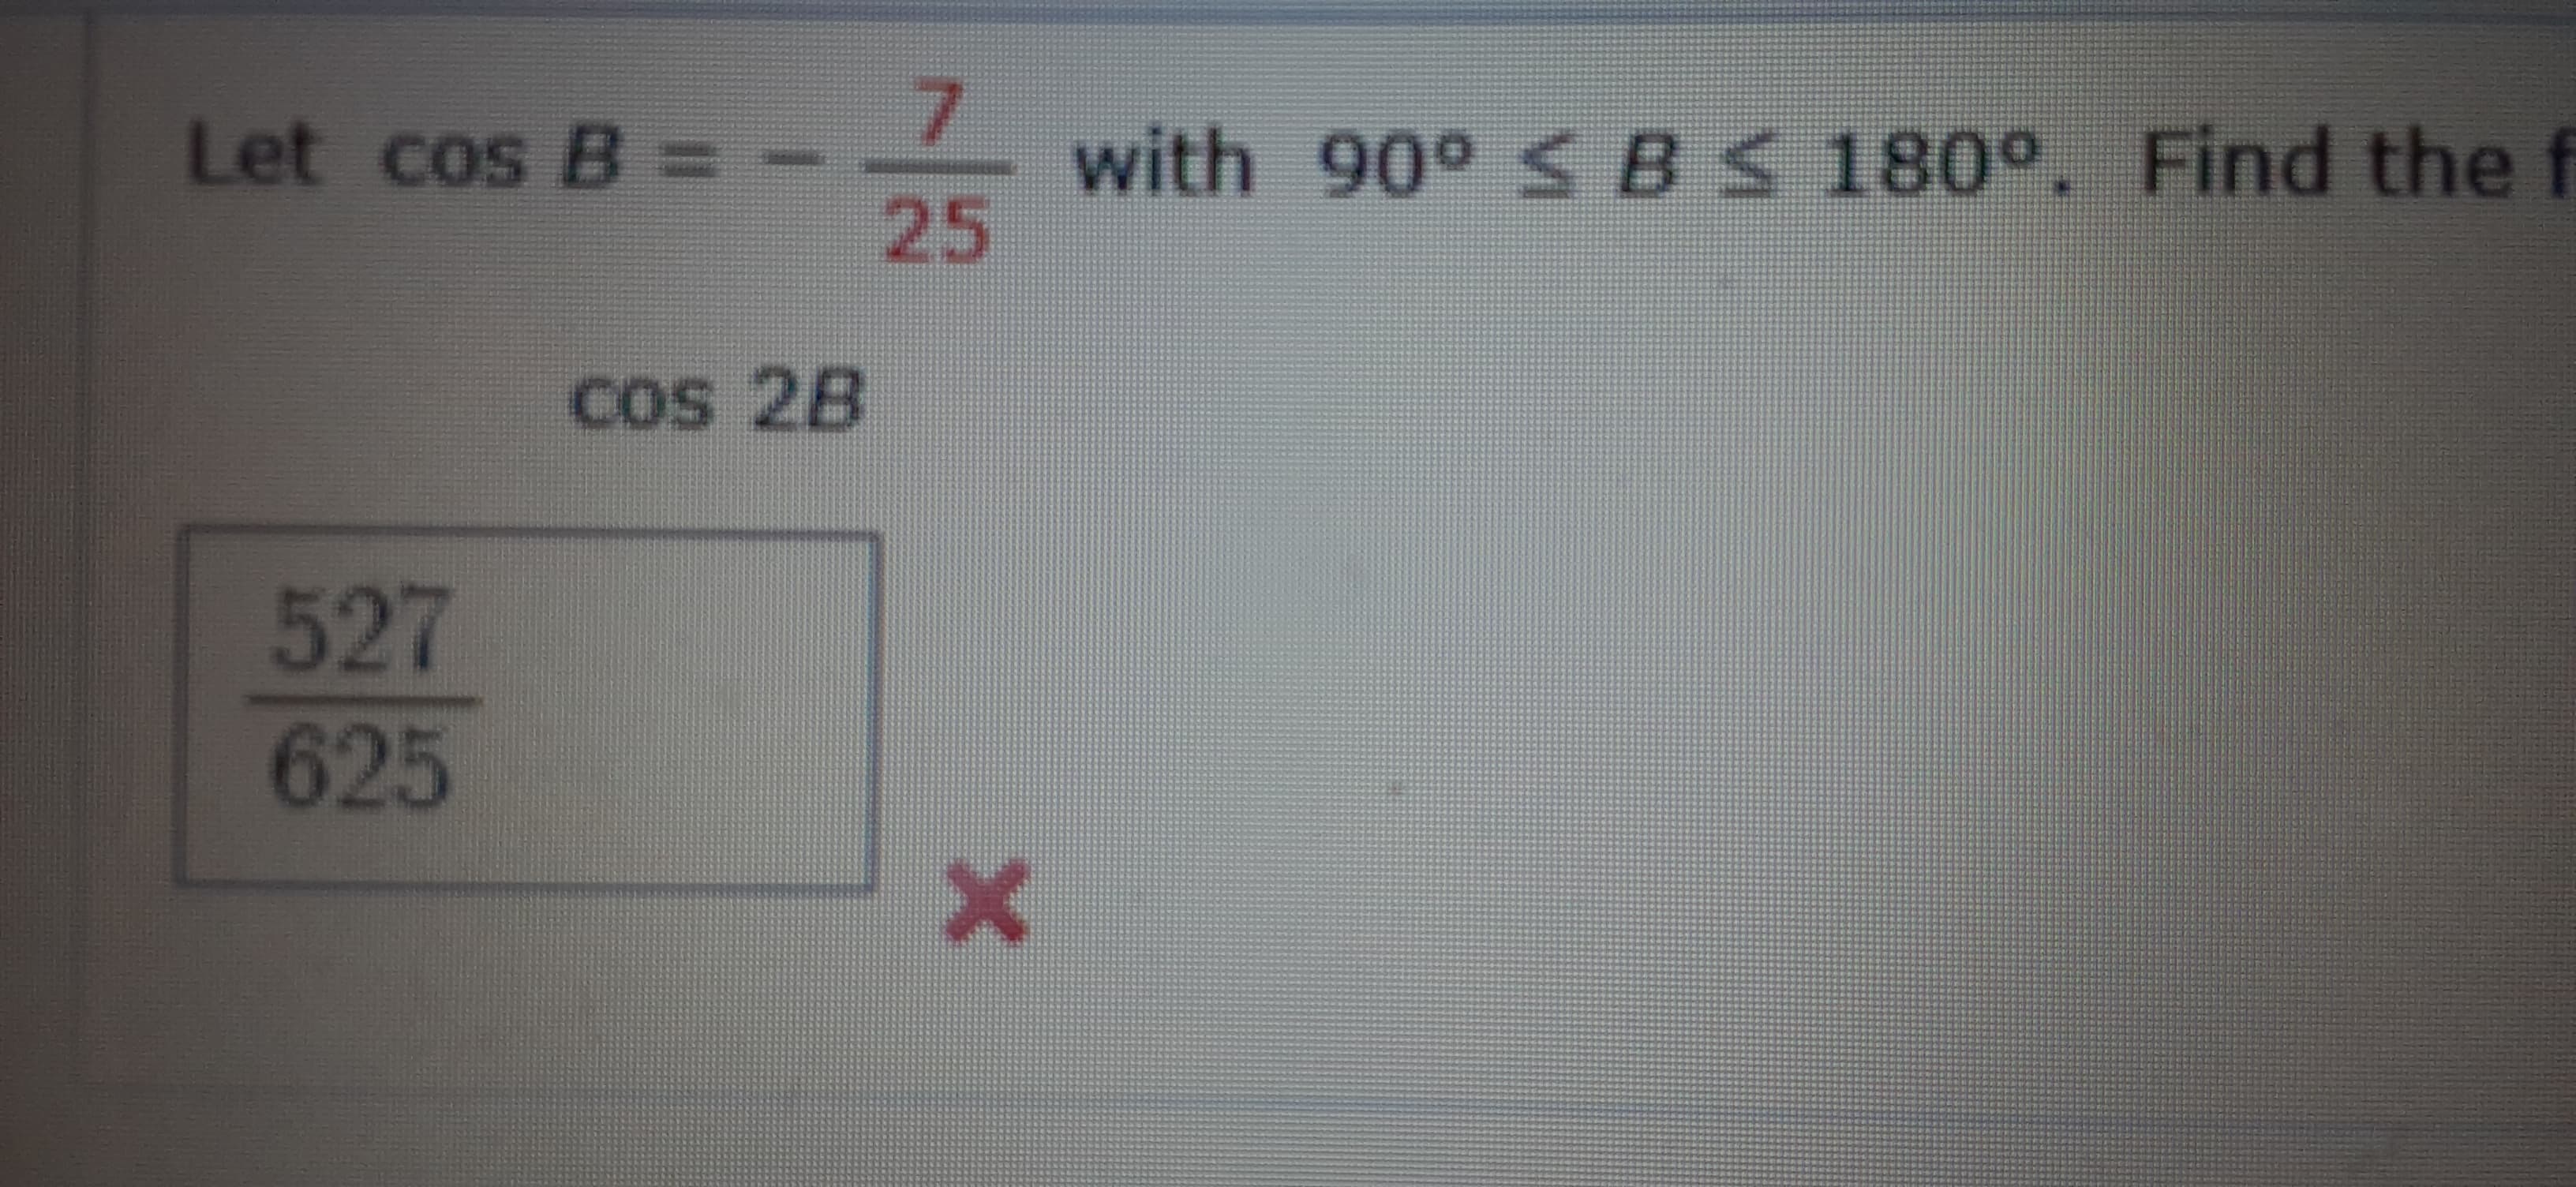 Let cos B =
with 90° S BS 180°. Find th
25
Cos 28
